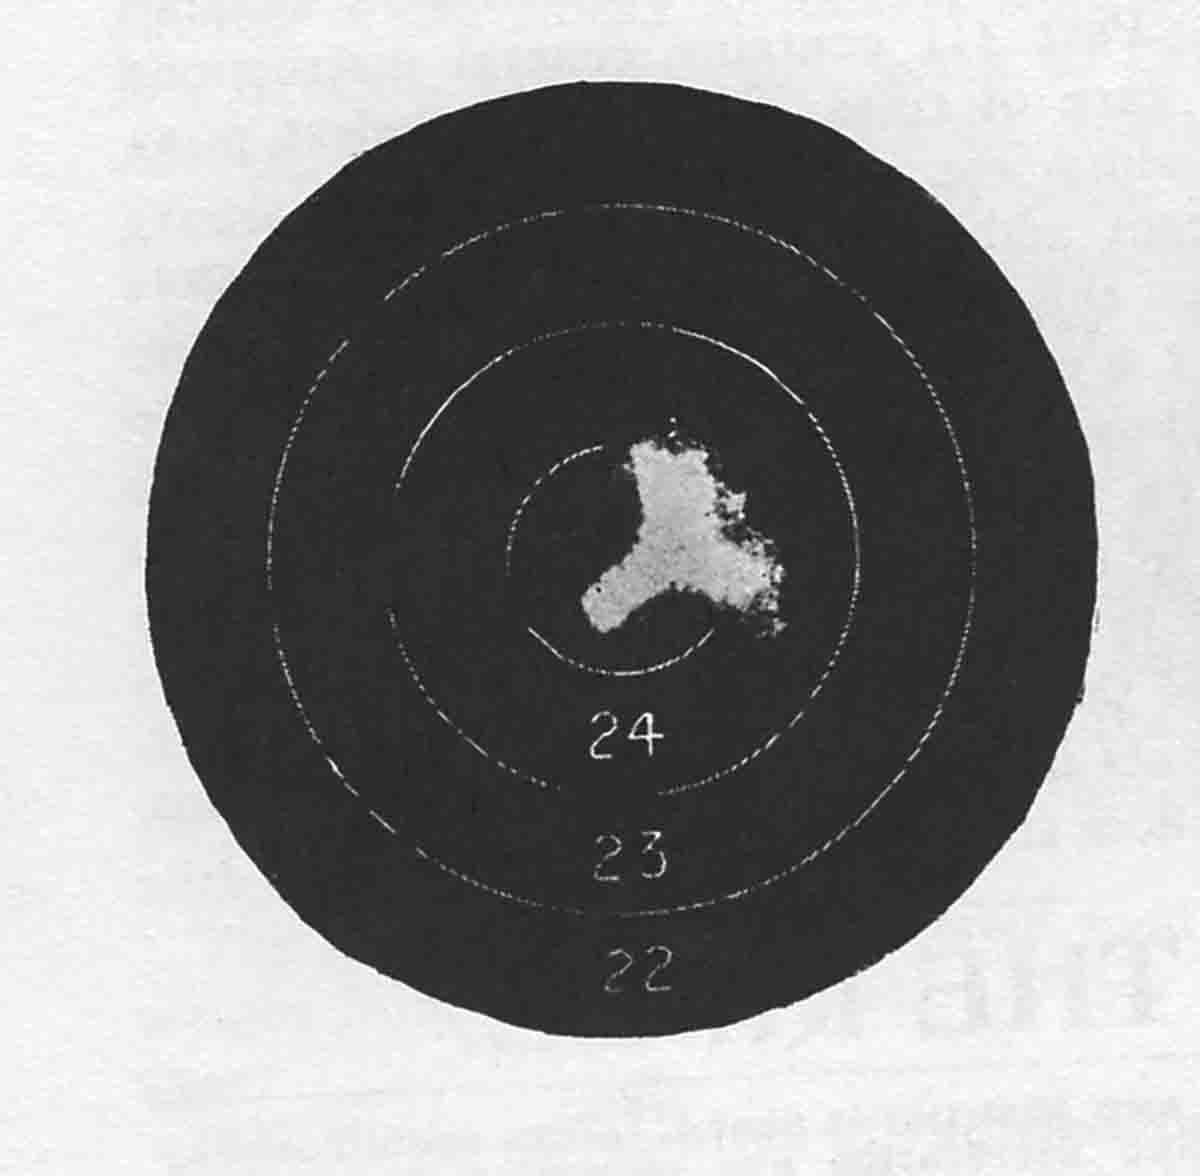 Perfect 250 score shot by A. Hubalek in the 1906 Zettler Rifle Club Open Gallery Tournament. Five shots at 75 feet, offhand, Zettler Gallery ¼-inch ring target. Target reproduced full size.